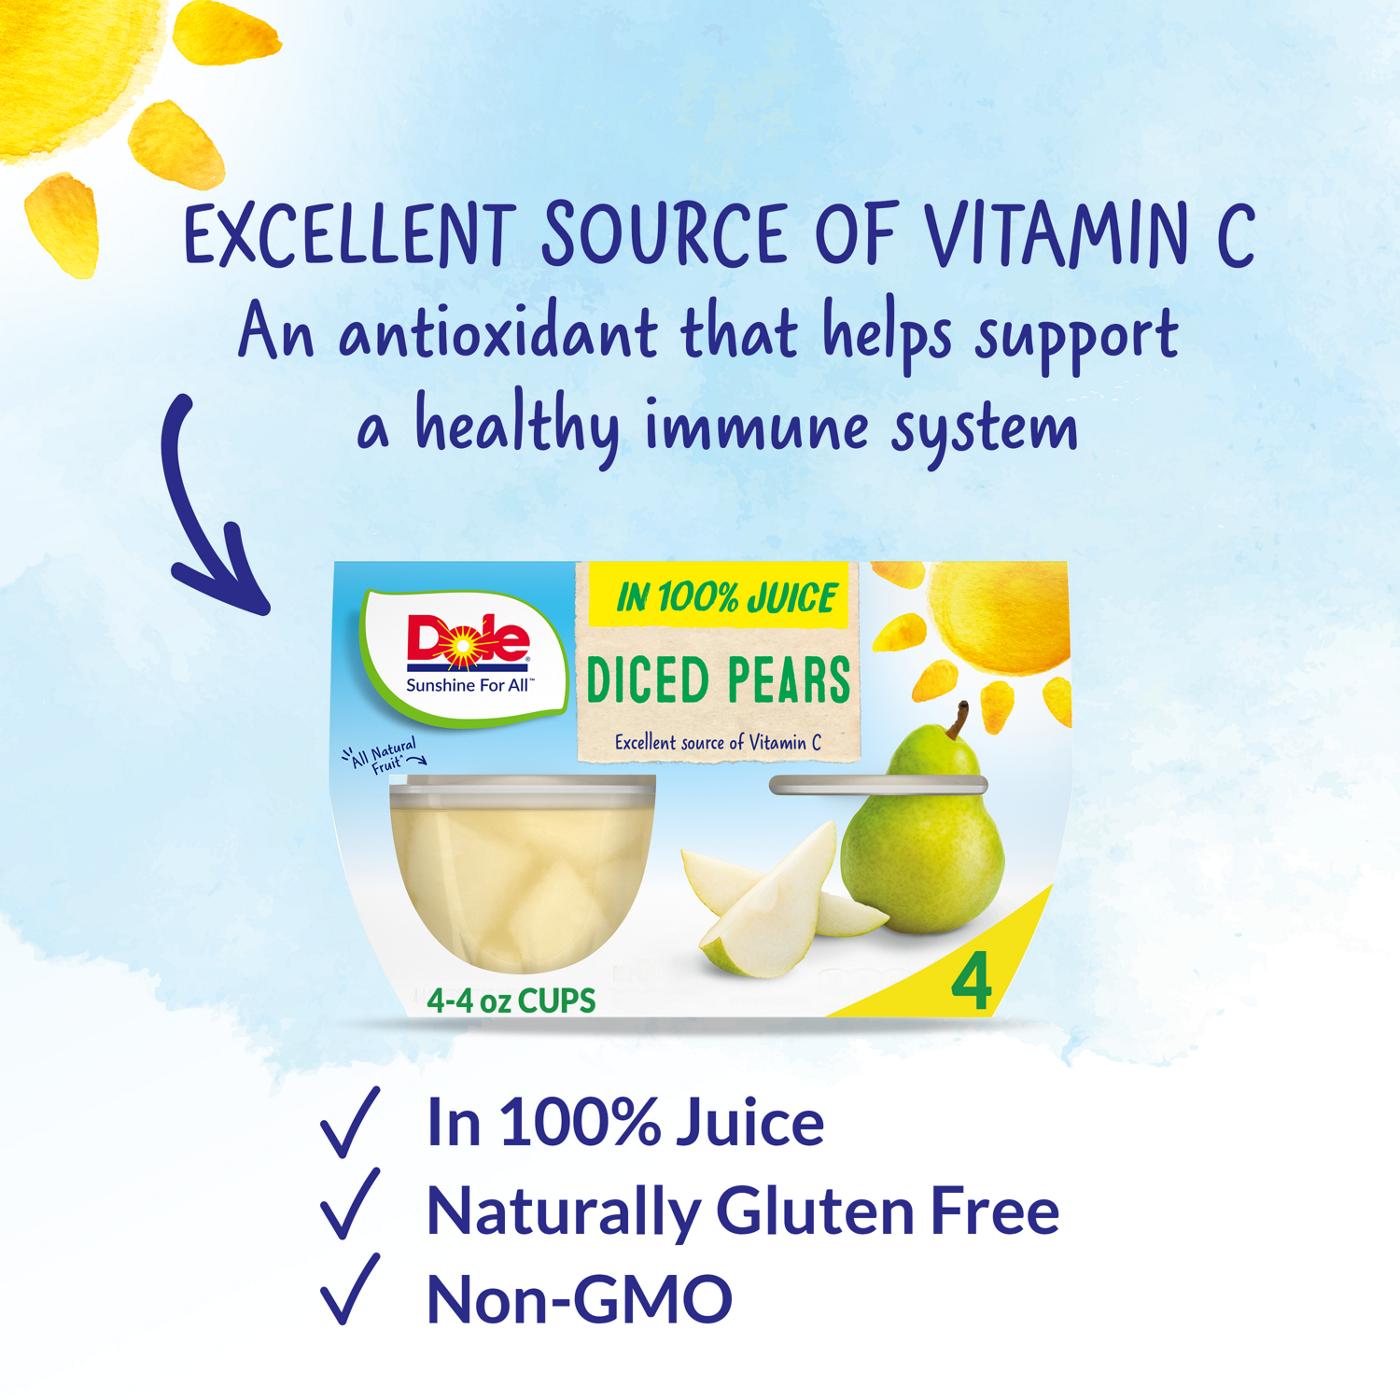 Dole Fruit Bowls - Diced Pears in 100% Juice; image 5 of 7